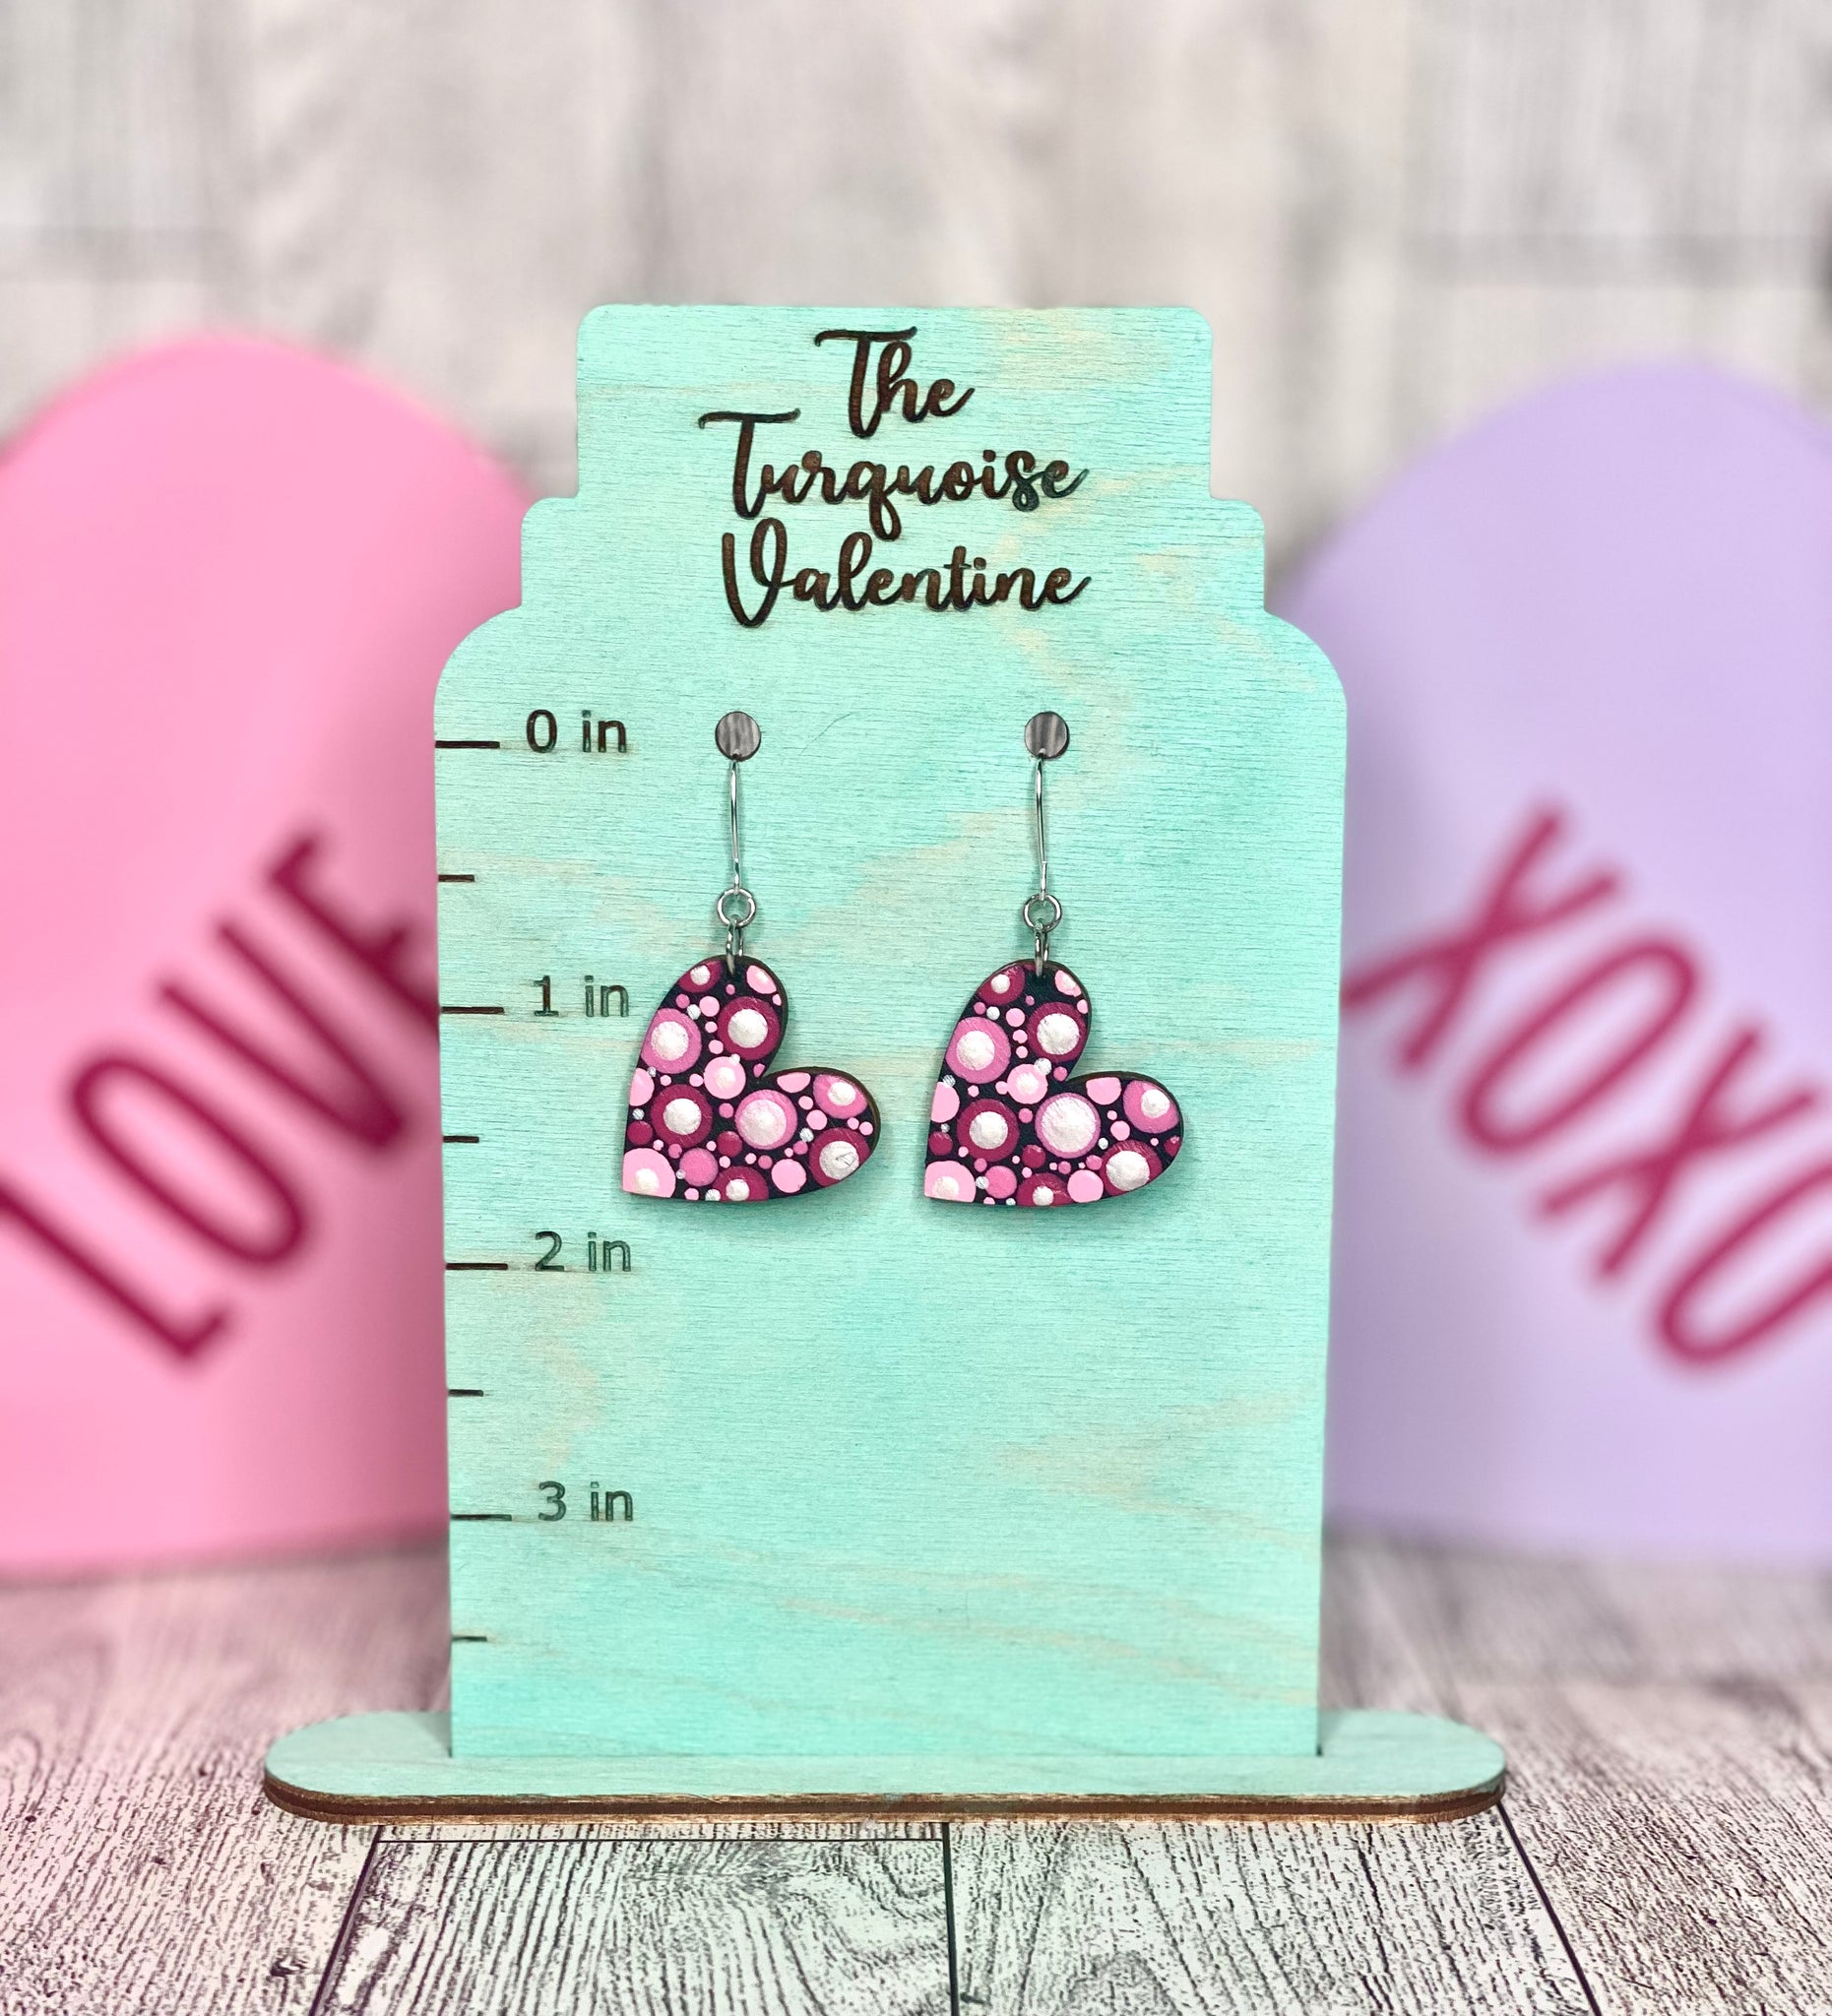 Black hearts with pink and pearl dot earrings